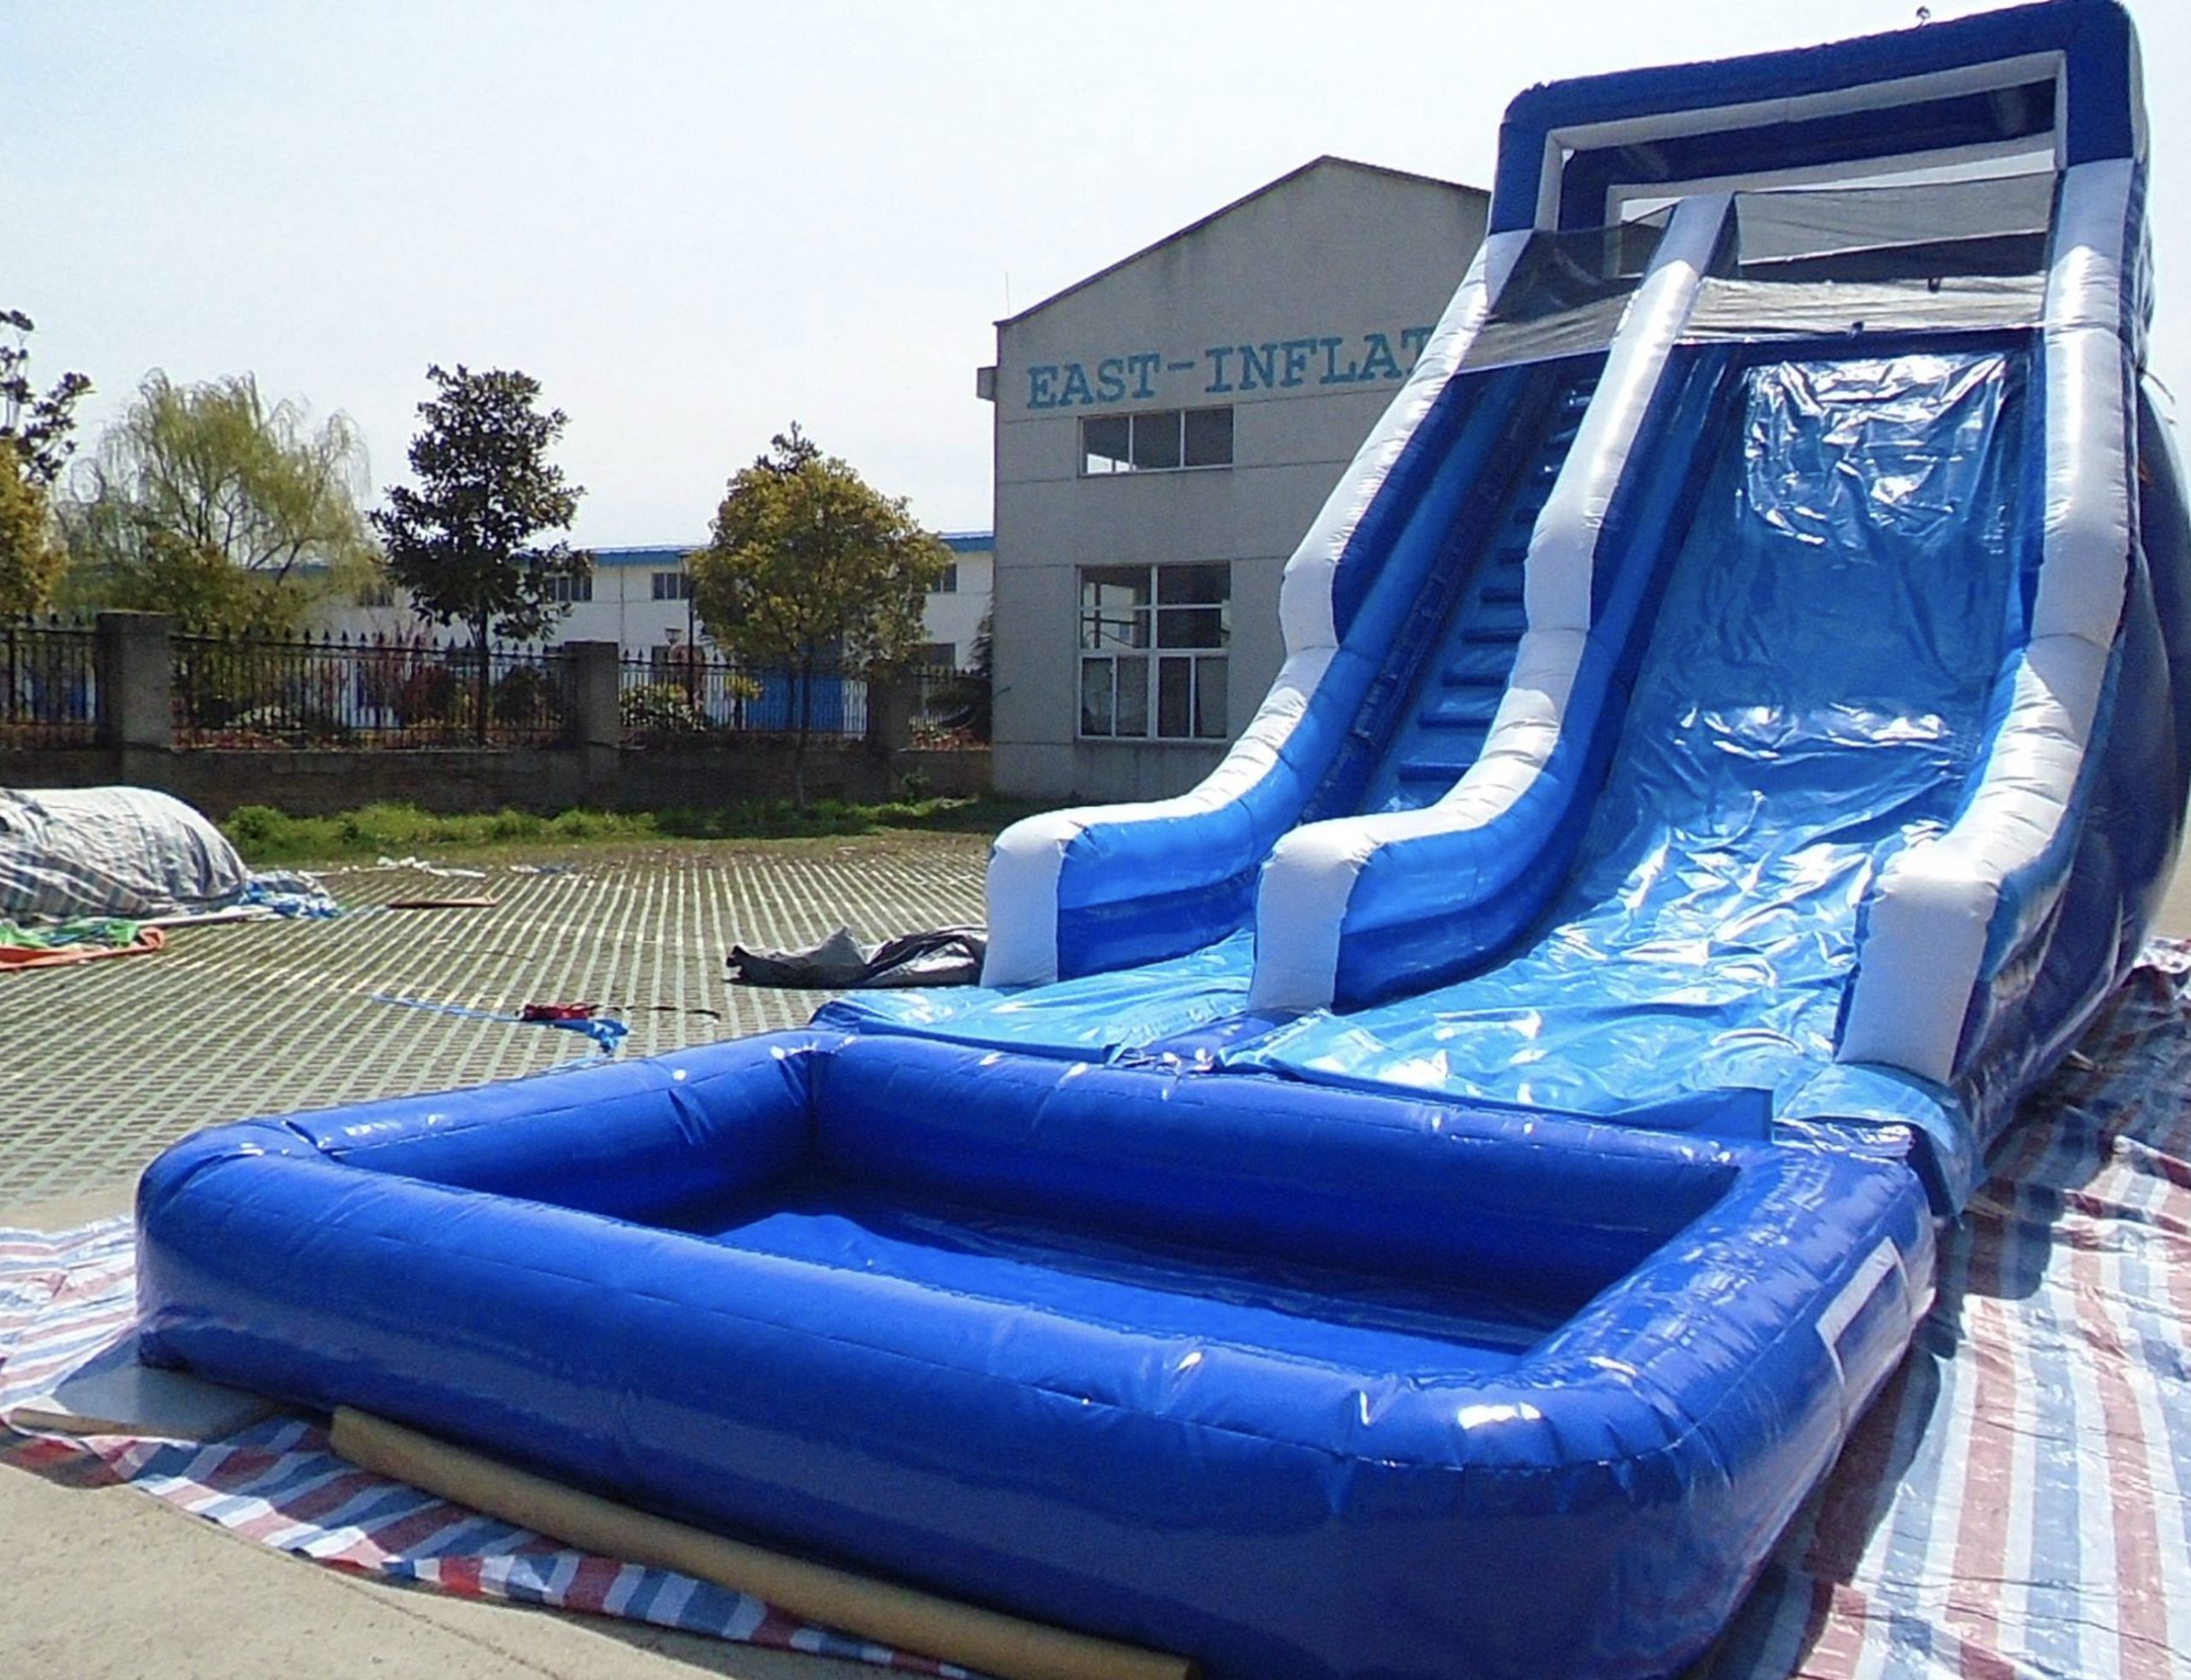 this image shows water slide in Folsom, CA